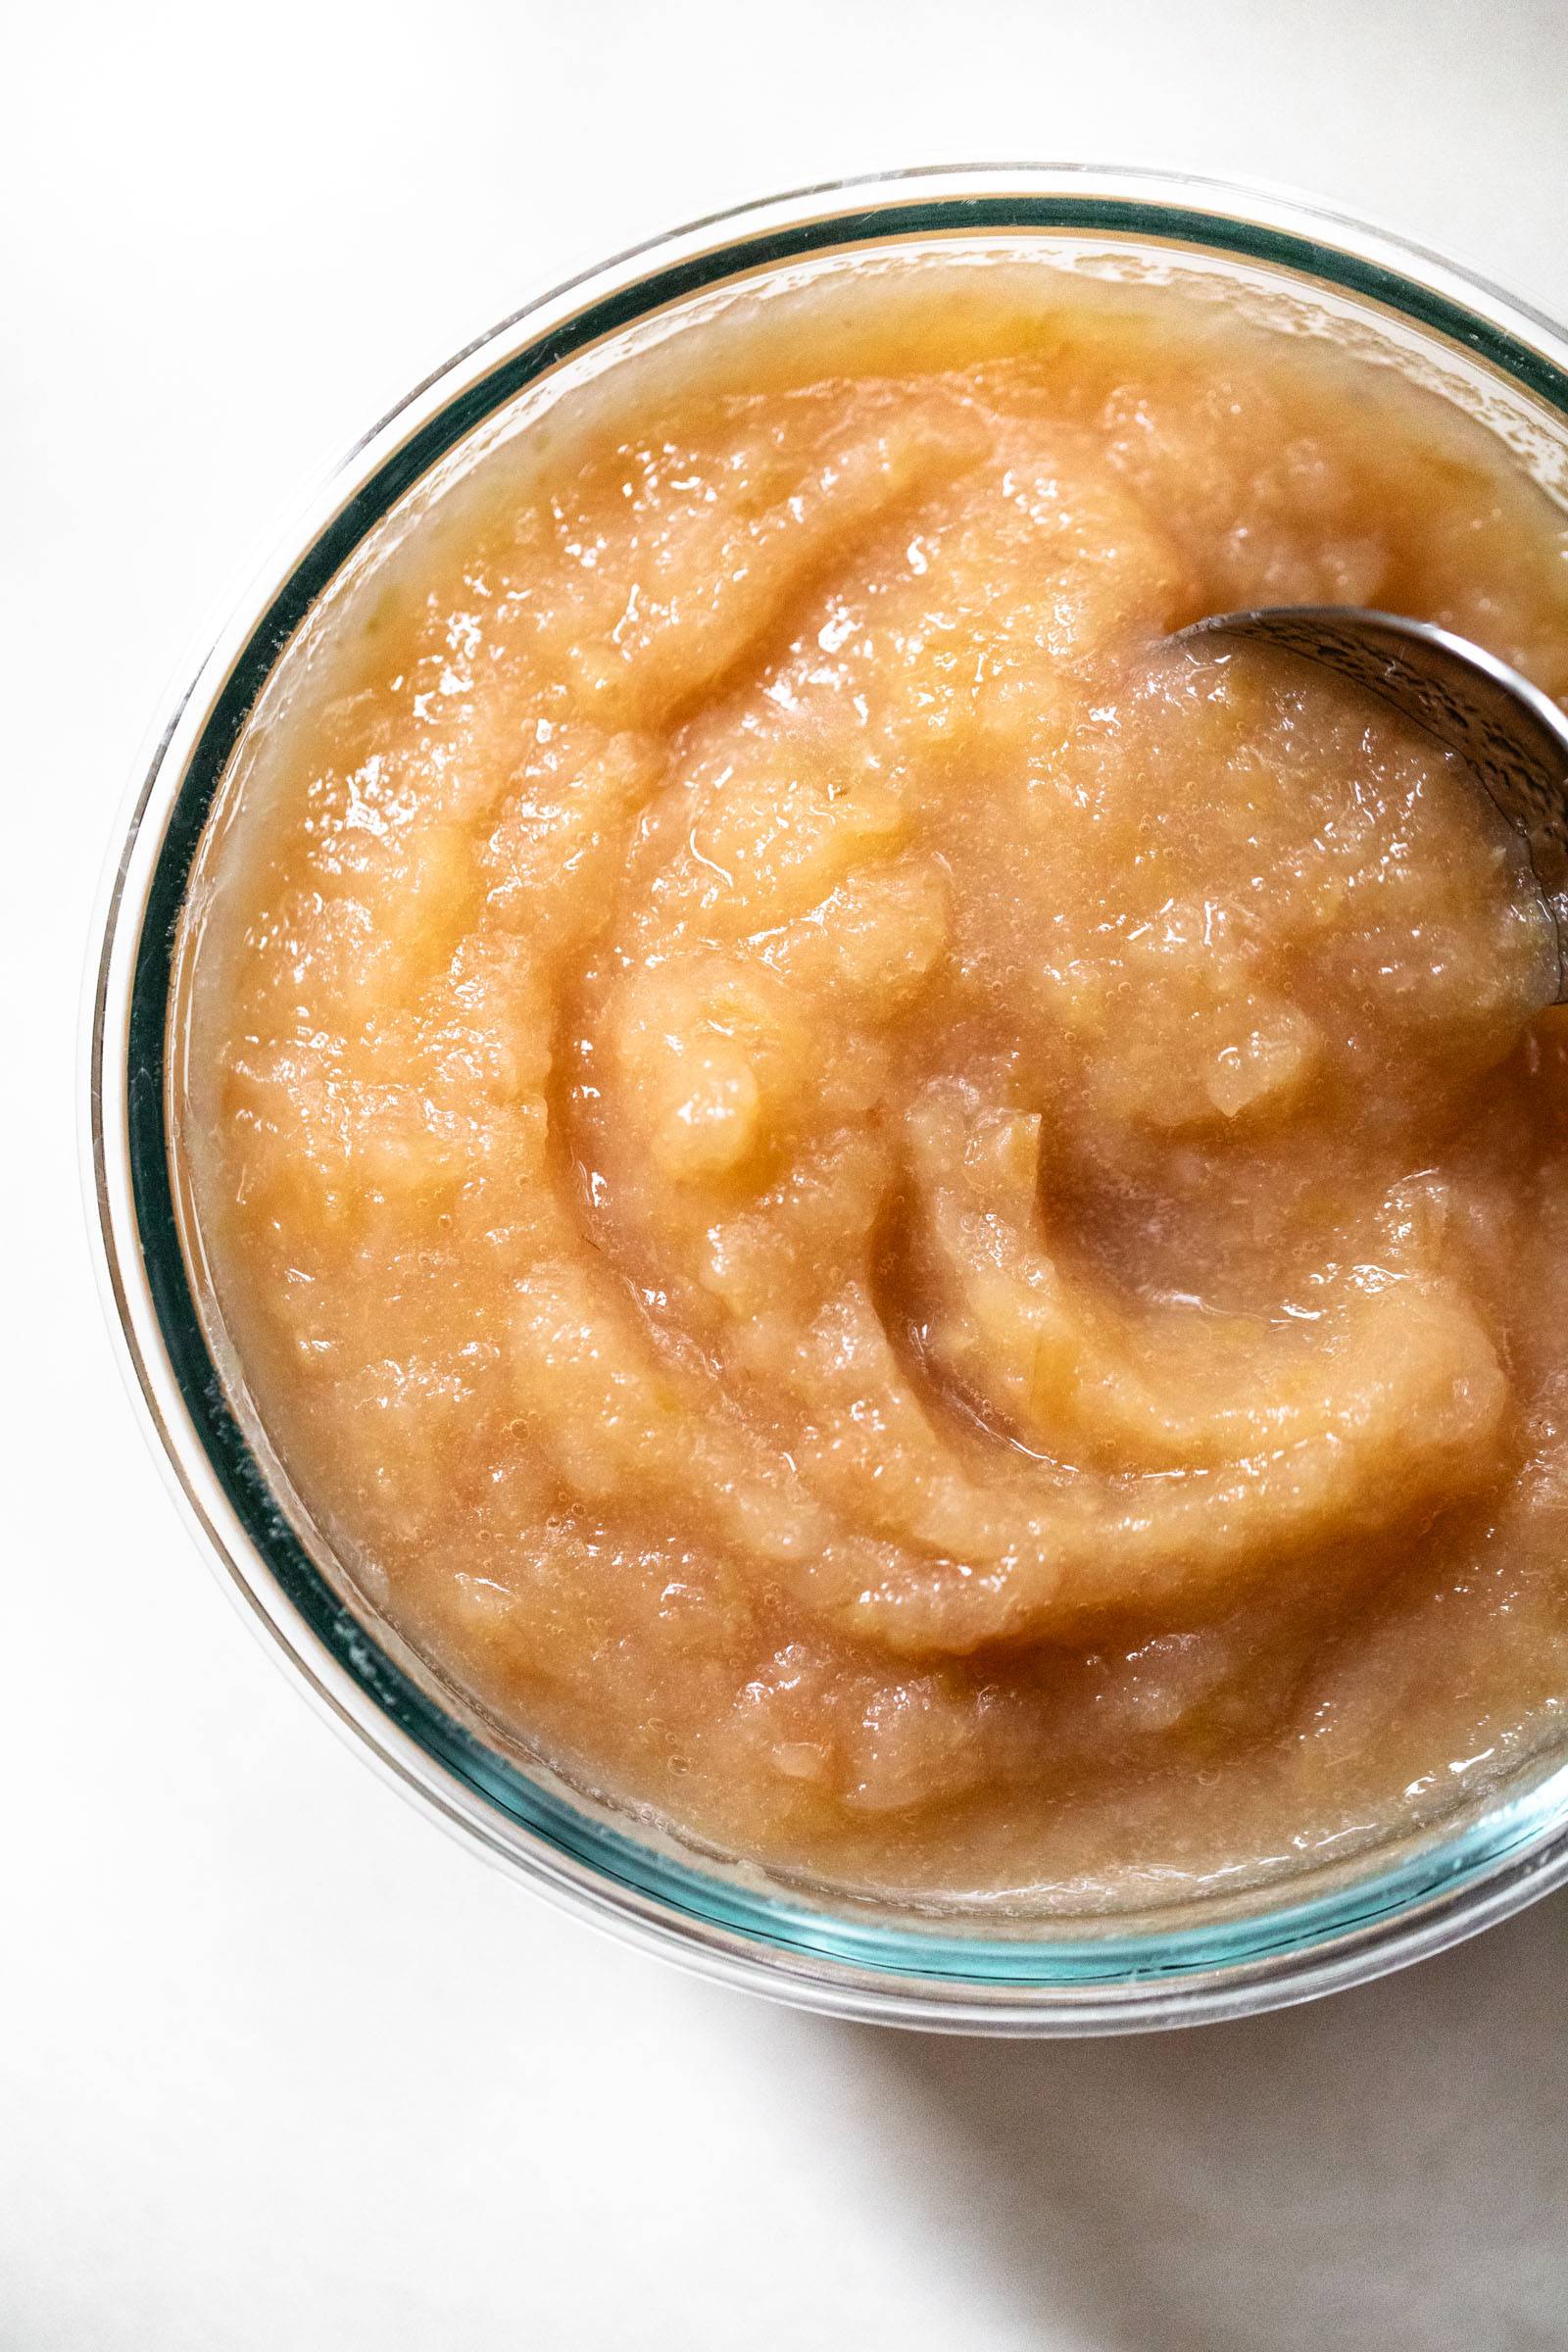 Homemade applesauce in a bowl.